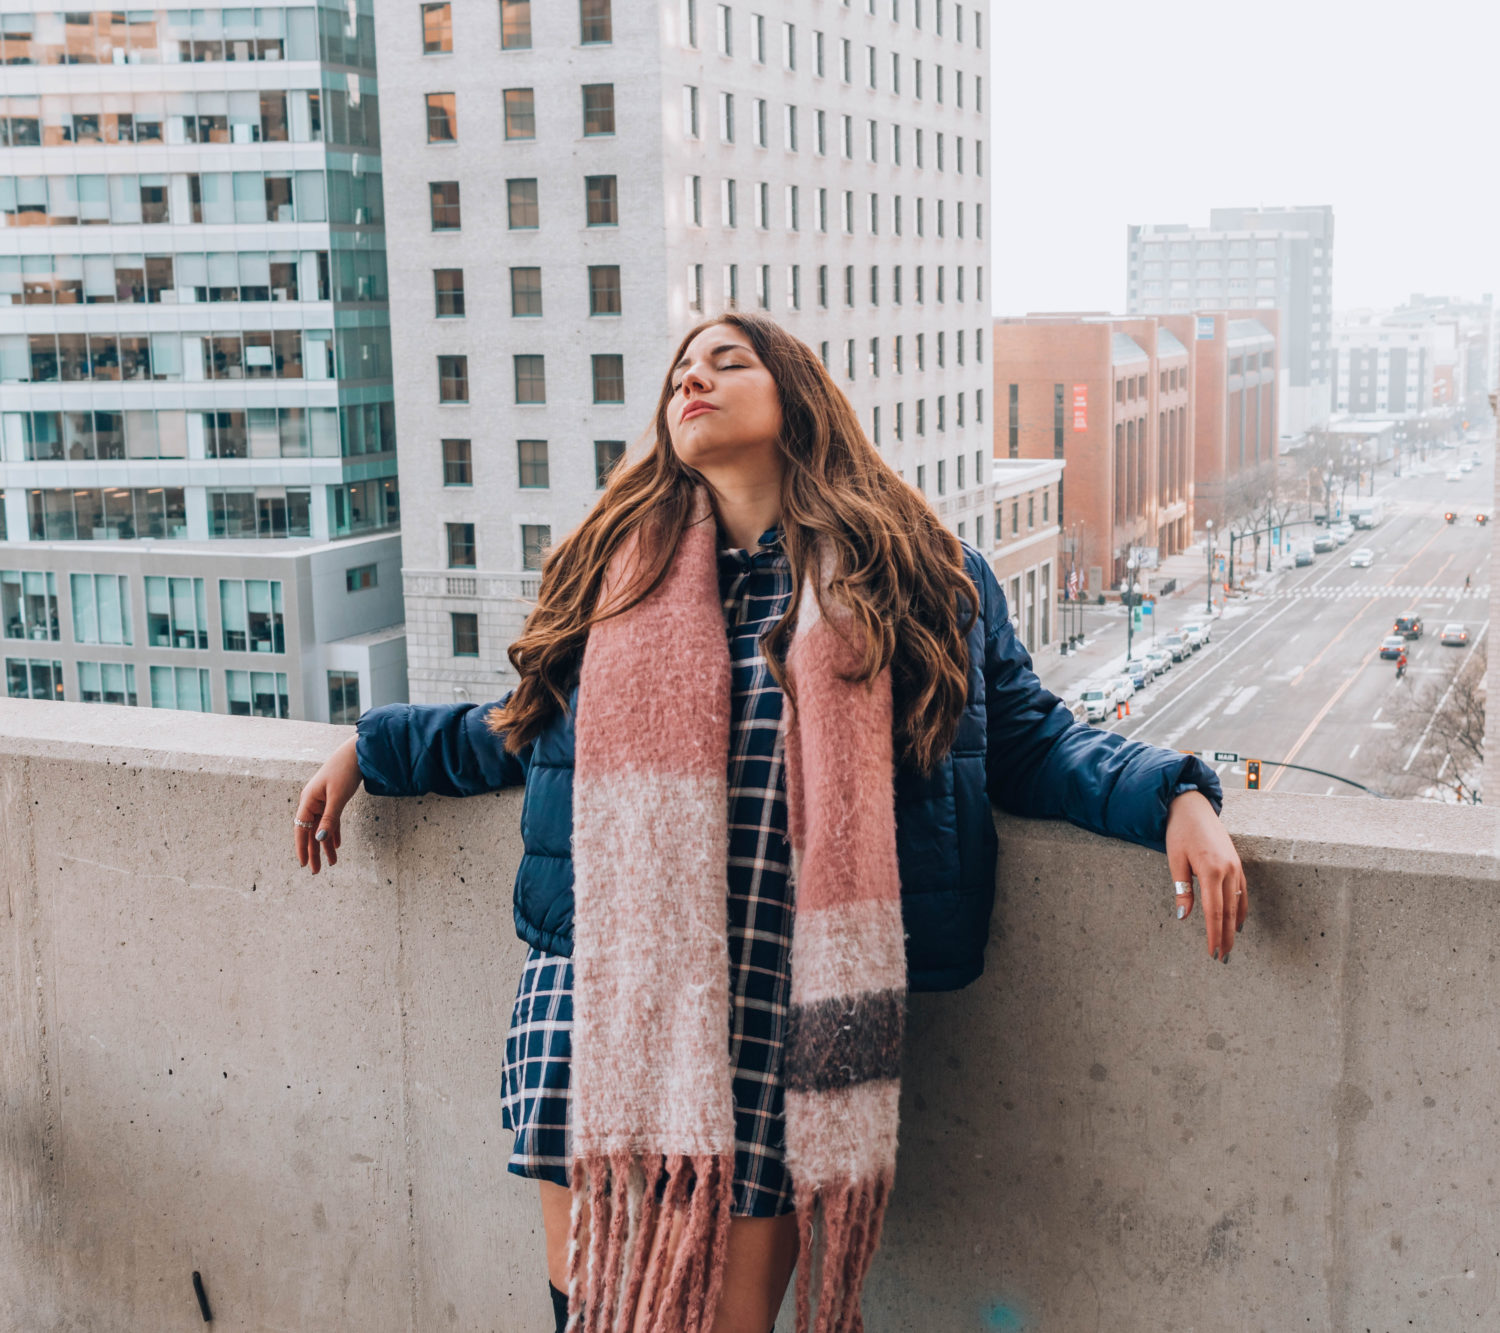 Girl woth long, brunette hair leaning backwards in winter outfit over city buildings.